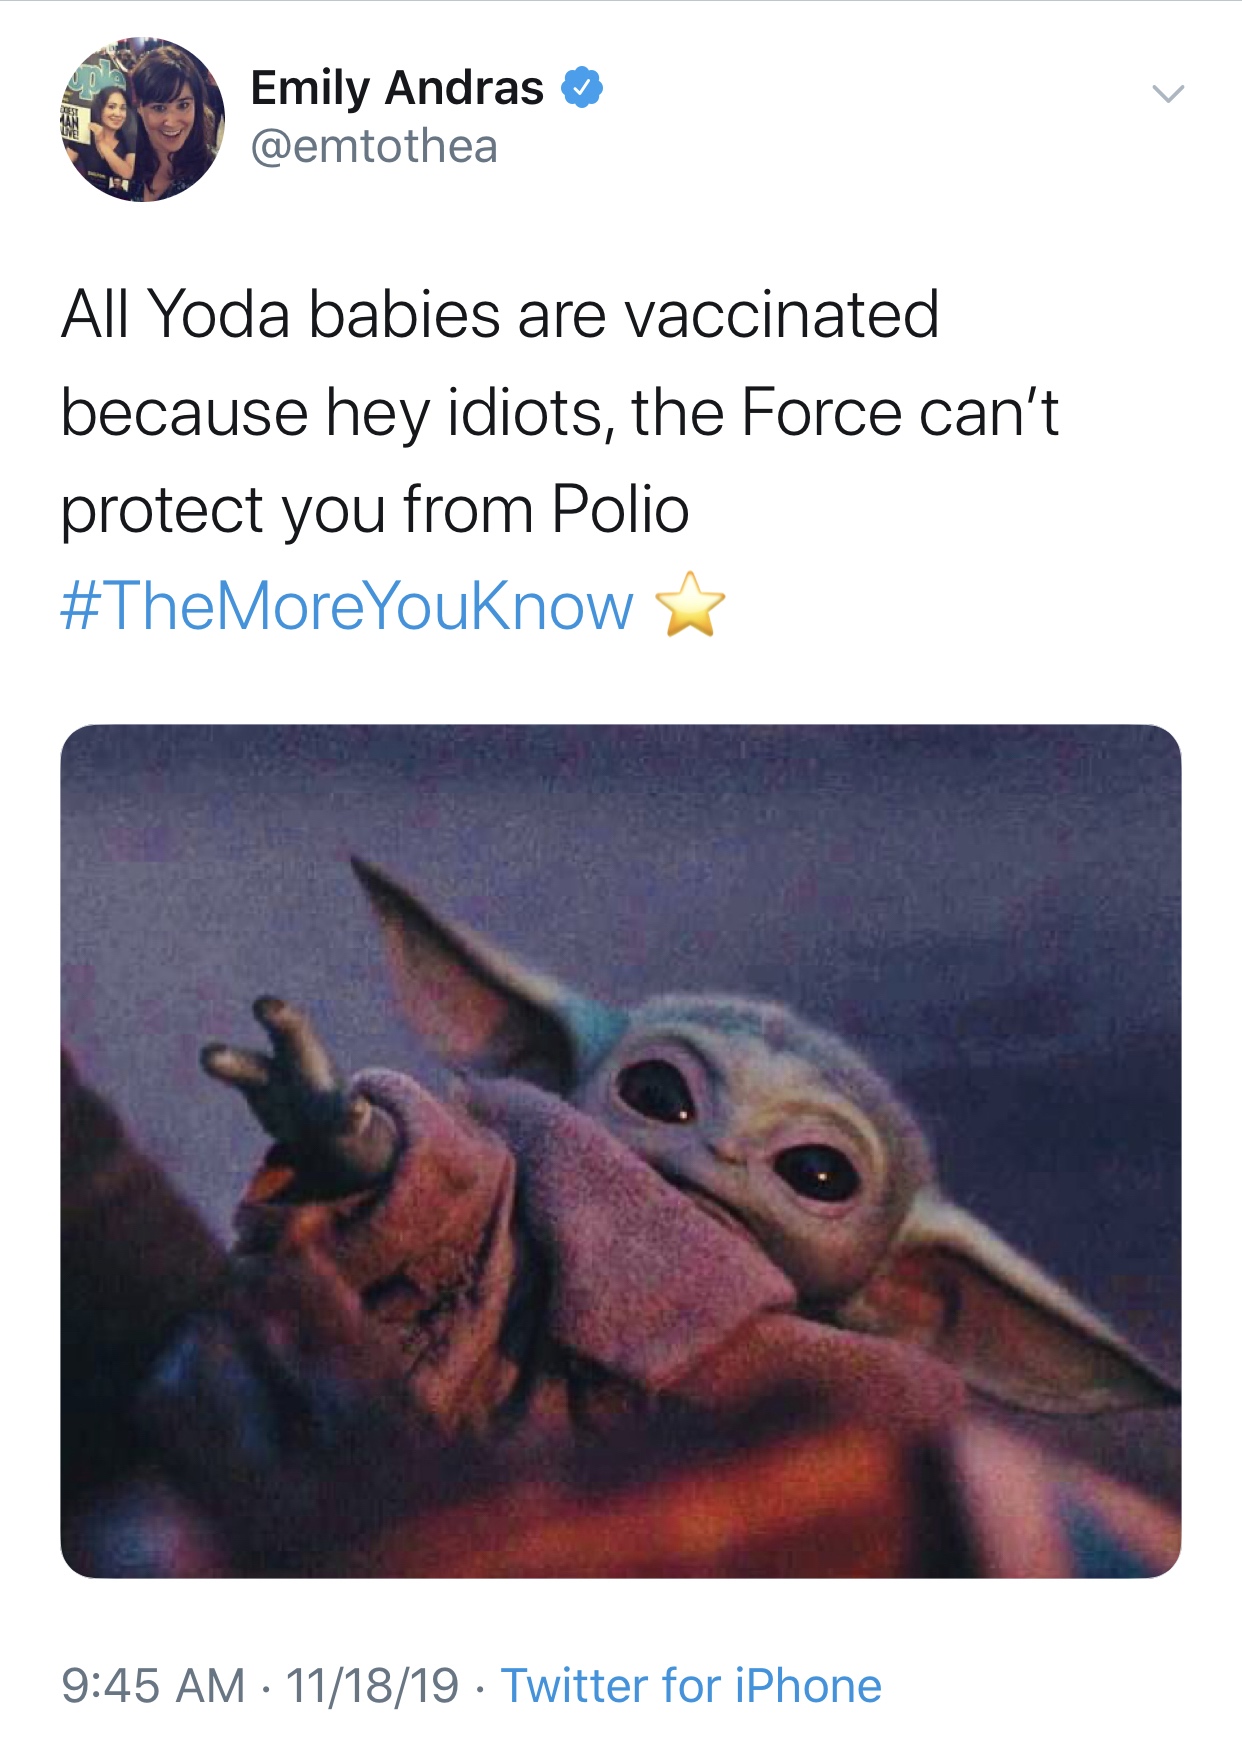 baby yoda meme - Emily Andras All Yoda babies are vaccinated because hey idiots, the Force can't protect you from Polio 111819 . Twitter for iPhone